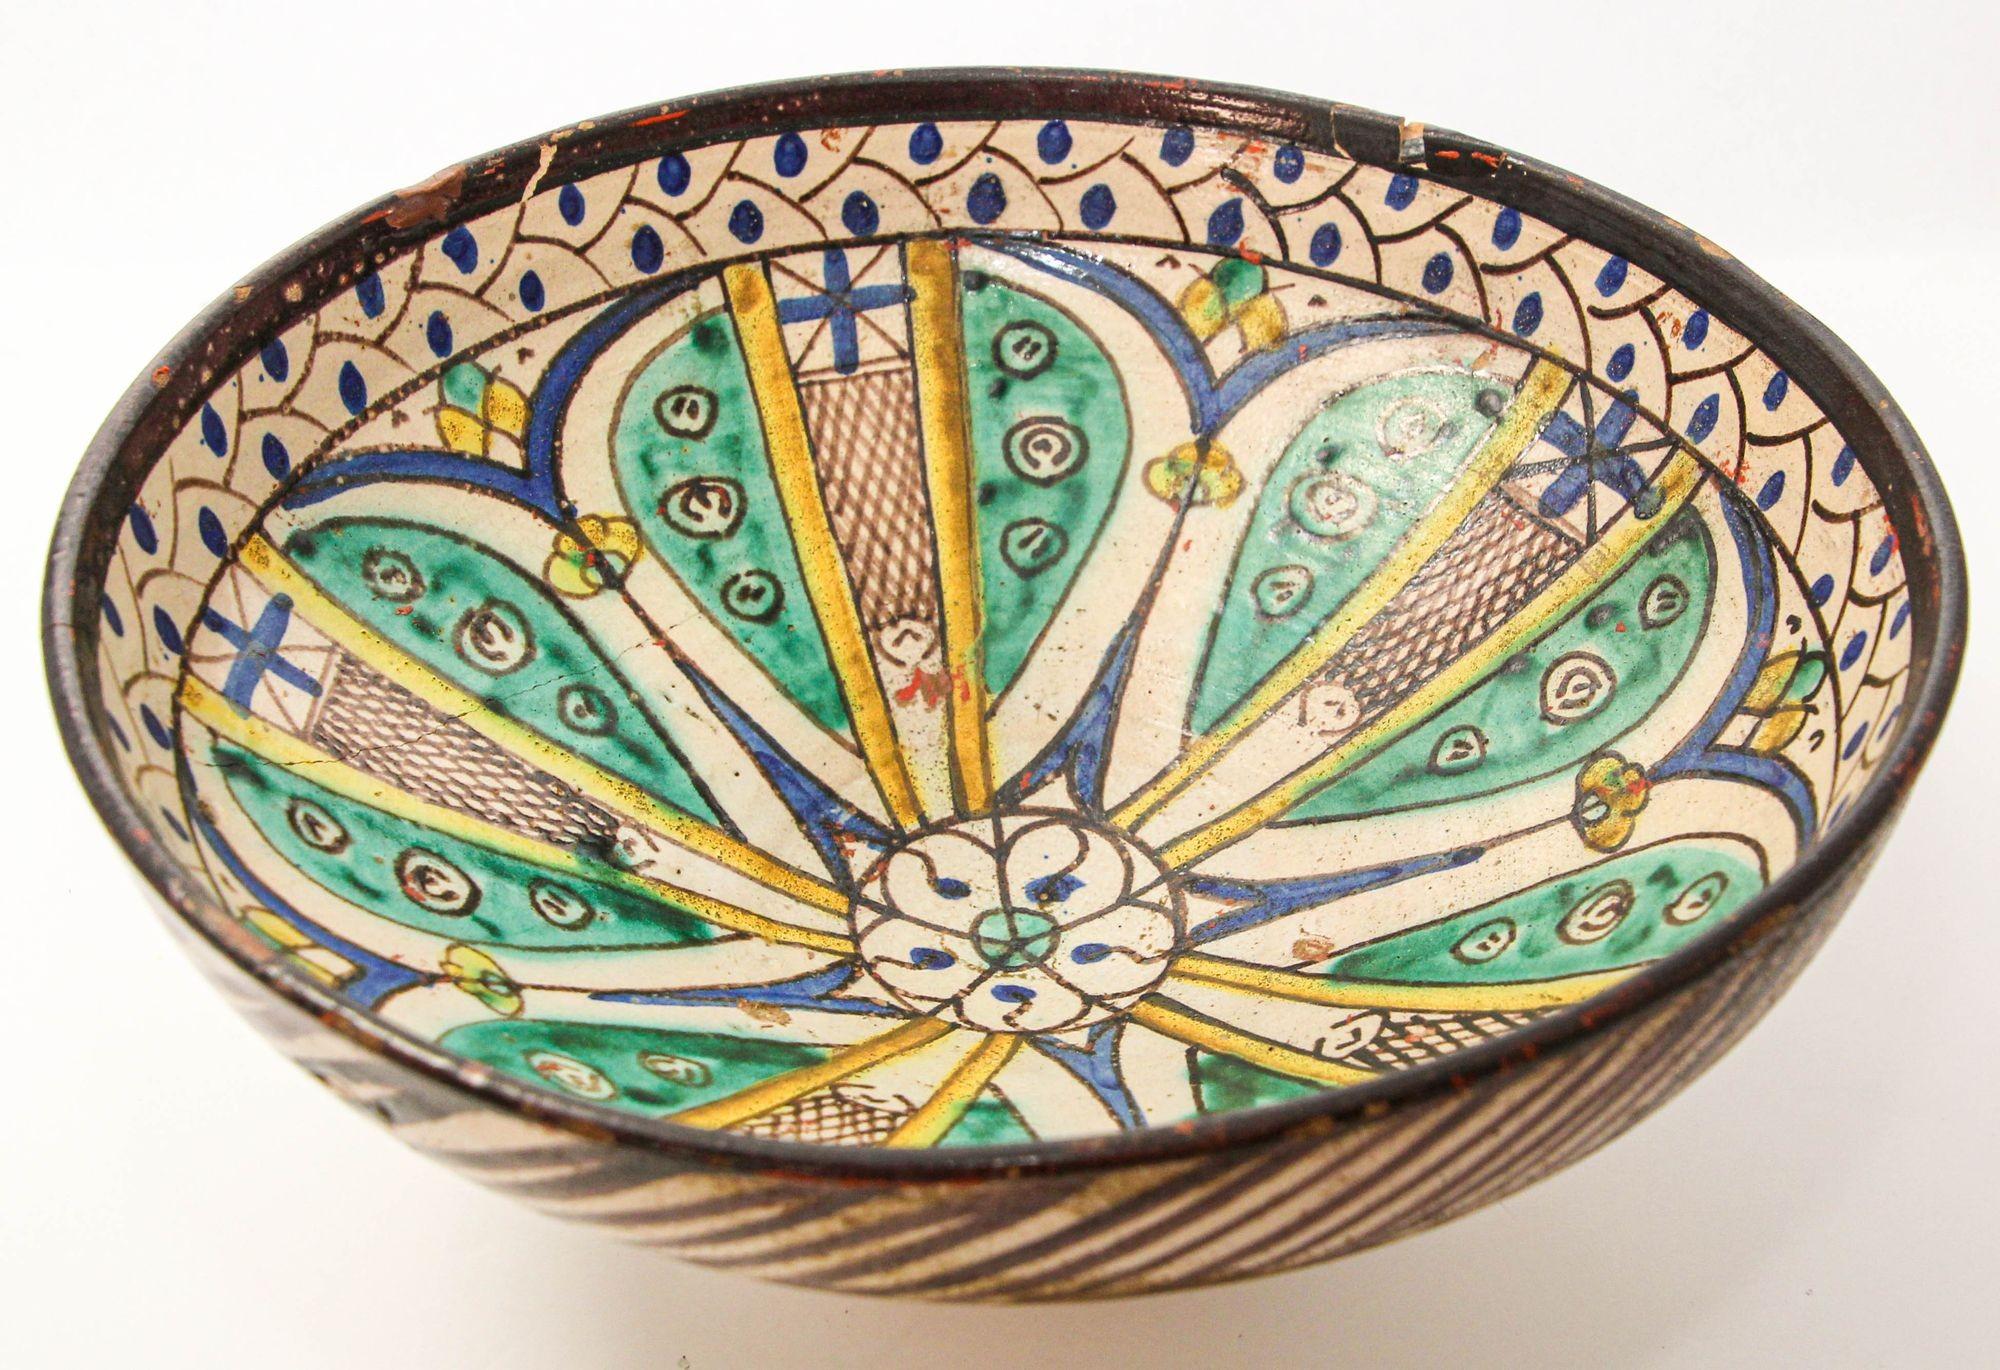 Antique 19th C. Moroccan Ceramic Bowl Polychrome Footed Dish Fez.
A 19th-century antique ceramic footed bowl from Morocco, Fez, showcases the exquisite artistry of Mokhfia polychrome pottery.
The bowl boasts a deep rounded form with a flattened rim,